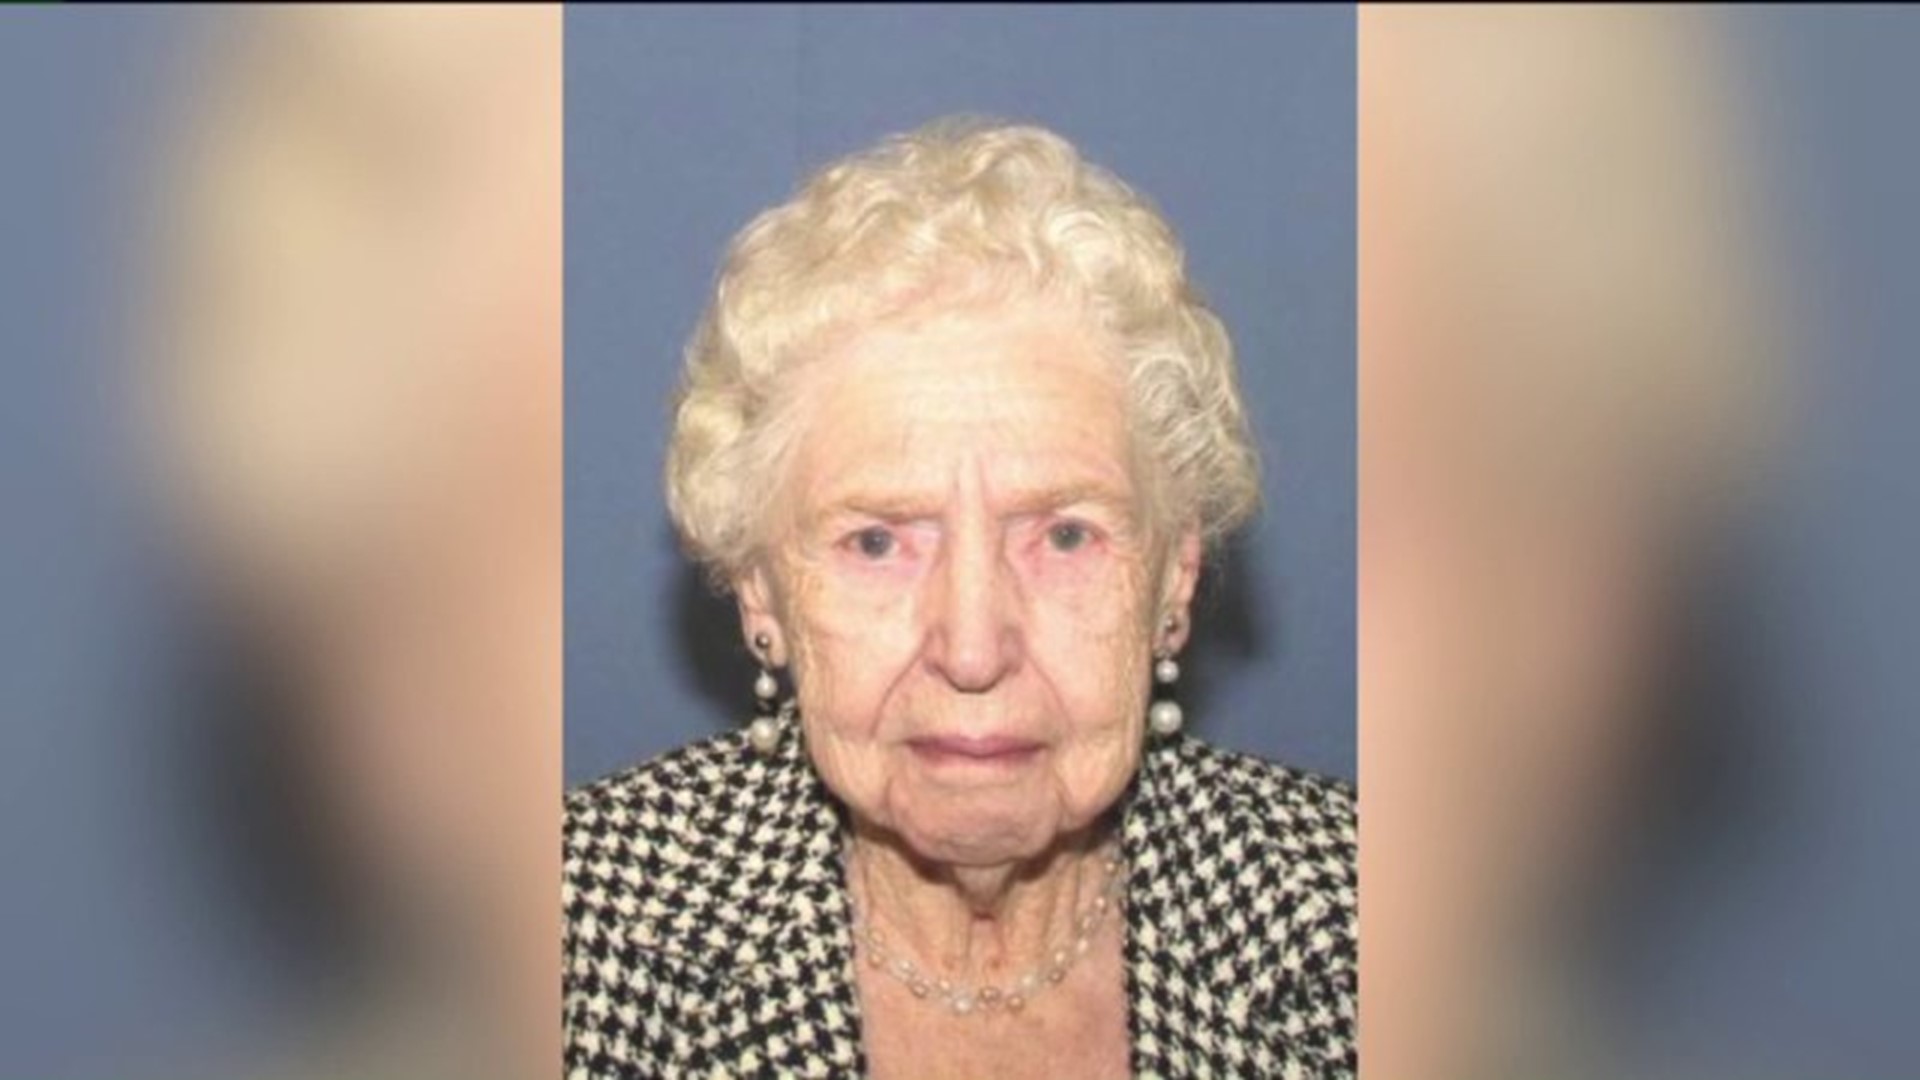 Teen Arrested After Missing 98 Year Old Woman Found Dead In Closet